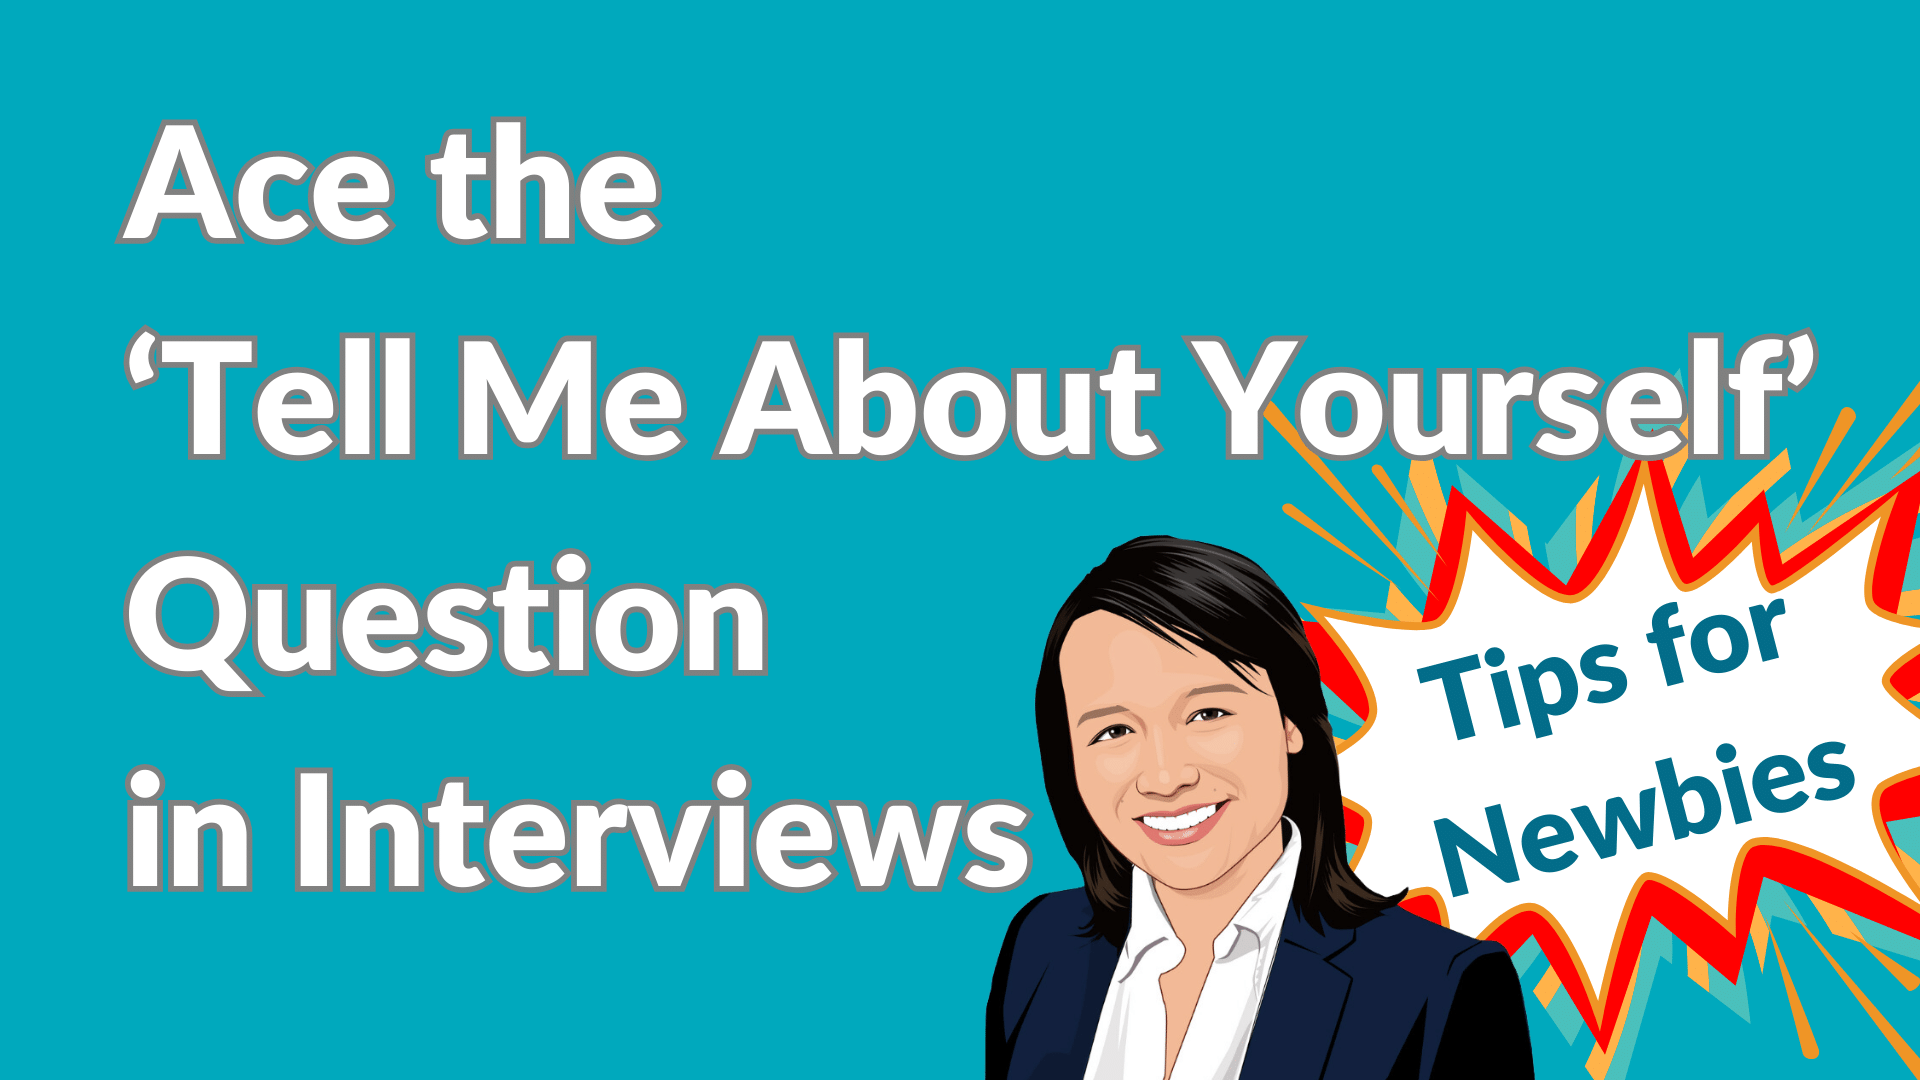 Ace the ‘Tell Me About Yourself’ Question in Interviews – Tips for Newbies